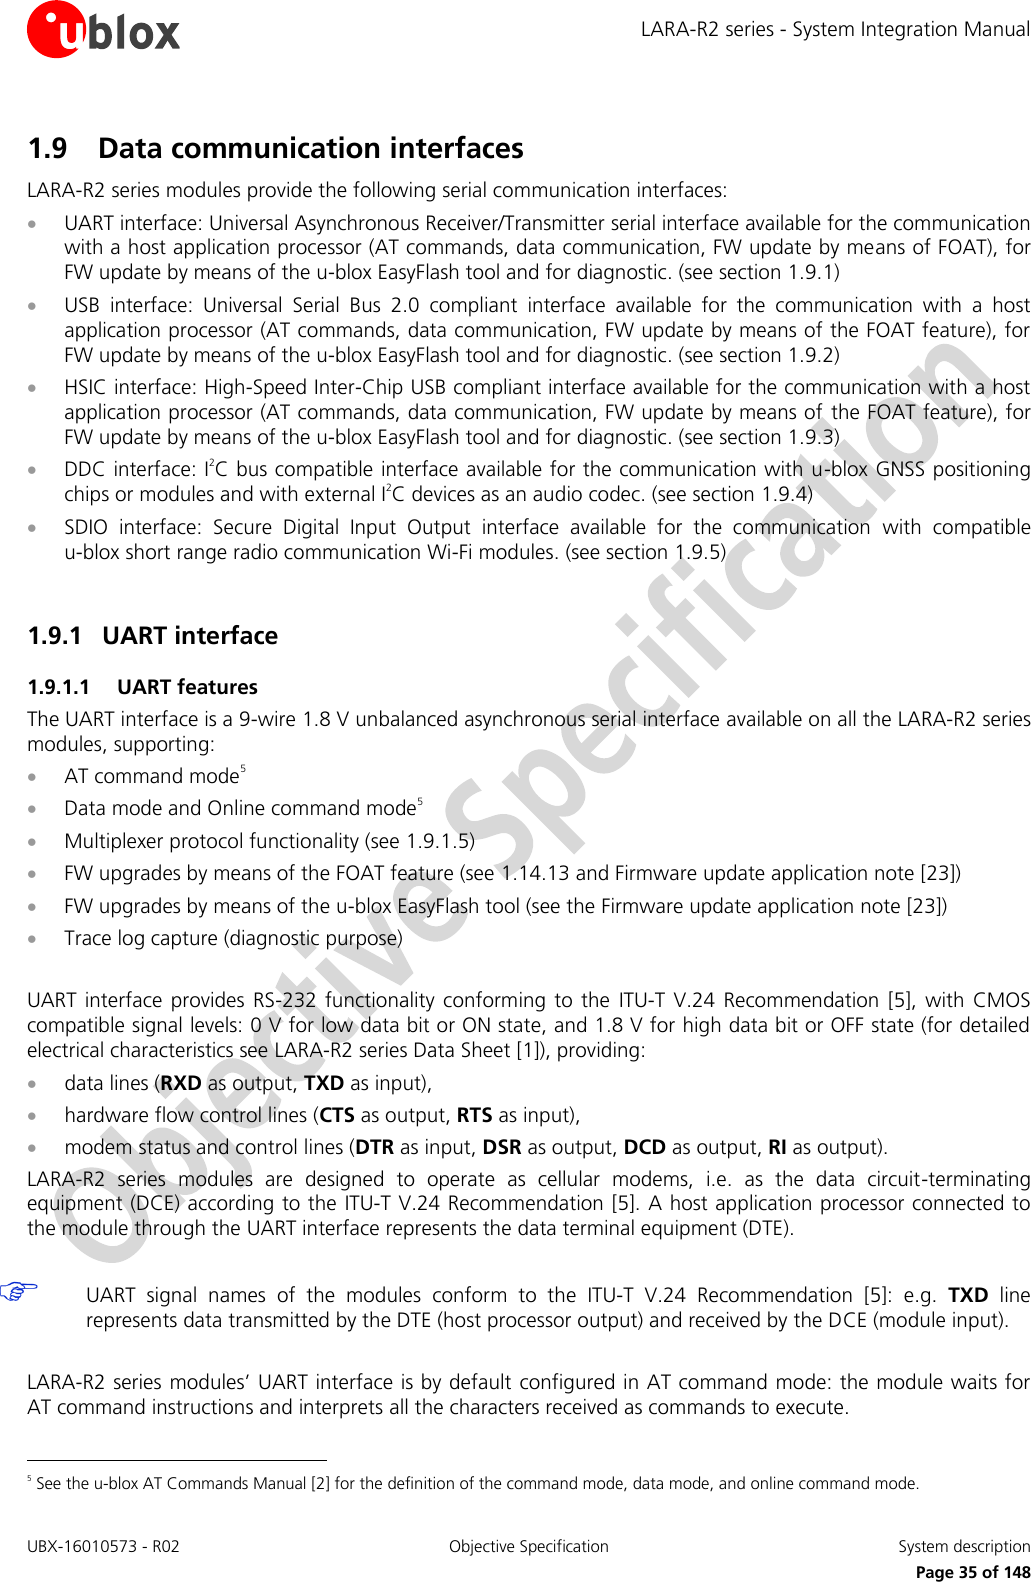 LARA-R2 series - System Integration Manual UBX-16010573 - R02  Objective Specification  System description     Page 35 of 148 1.9 Data communication interfaces LARA-R2 series modules provide the following serial communication interfaces:  UART interface: Universal Asynchronous Receiver/Transmitter serial interface available for the communication with a host application processor (AT commands, data communication, FW update by means of FOAT), for FW update by means of the u-blox EasyFlash tool and for diagnostic. (see section 1.9.1)  USB  interface:  Universal  Serial  Bus  2.0  compliant  interface  available  for  the  communication  with  a  host application processor (AT commands, data communication, FW update by means of the FOAT feature), for FW update by means of the u-blox EasyFlash tool and for diagnostic. (see section 1.9.2)  HSIC interface: High-Speed Inter-Chip USB compliant interface available for the communication with a host application processor (AT commands, data communication, FW update by means of  the FOAT feature), for FW update by means of the u-blox EasyFlash tool and for diagnostic. (see section 1.9.3)  DDC interface: I2C bus compatible interface available for the communication with u-blox GNSS positioning chips or modules and with external I2C devices as an audio codec. (see section 1.9.4)  SDIO  interface:  Secure  Digital  Input  Output  interface  available  for  the  communication  with  compatible u-blox short range radio communication Wi-Fi modules. (see section 1.9.5)  1.9.1 UART interface  1.9.1.1 UART features The UART interface is a 9-wire 1.8 V unbalanced asynchronous serial interface available on all the LARA-R2 series modules, supporting:  AT command mode5  Data mode and Online command mode5  Multiplexer protocol functionality (see 1.9.1.5)  FW upgrades by means of the FOAT feature (see 1.14.13 and Firmware update application note [23])  FW upgrades by means of the u-blox EasyFlash tool (see the Firmware update application note [23])  Trace log capture (diagnostic purpose)  UART  interface  provides  RS-232  functionality  conforming  to  the  ITU-T  V.24 Recommendation [5],  with  CMOS compatible signal levels: 0 V for low data bit or ON state, and 1.8 V for high data bit or OFF state (for detailed electrical characteristics see LARA-R2 series Data Sheet [1]), providing:  data lines (RXD as output, TXD as input),   hardware flow control lines (CTS as output, RTS as input),   modem status and control lines (DTR as input, DSR as output, DCD as output, RI as output). LARA-R2  series  modules  are  designed  to  operate  as  cellular  modems,  i.e.  as  the  data  circuit-terminating equipment (DCE) according to the ITU-T V.24 Recommendation [5]. A host application processor connected to the module through the UART interface represents the data terminal equipment (DTE).   UART  signal  names  of  the  modules  conform  to  the  ITU-T  V.24  Recommendation [5]:  e.g.  TXD  line represents data transmitted by the DTE (host processor output) and received by the DCE (module input).  LARA-R2 series modules’ UART interface is by default configured in AT command mode: the module waits for AT command instructions and interprets all the characters received as commands to execute.                                                        5 See the u-blox AT Commands Manual [2] for the definition of the command mode, data mode, and online command mode. 